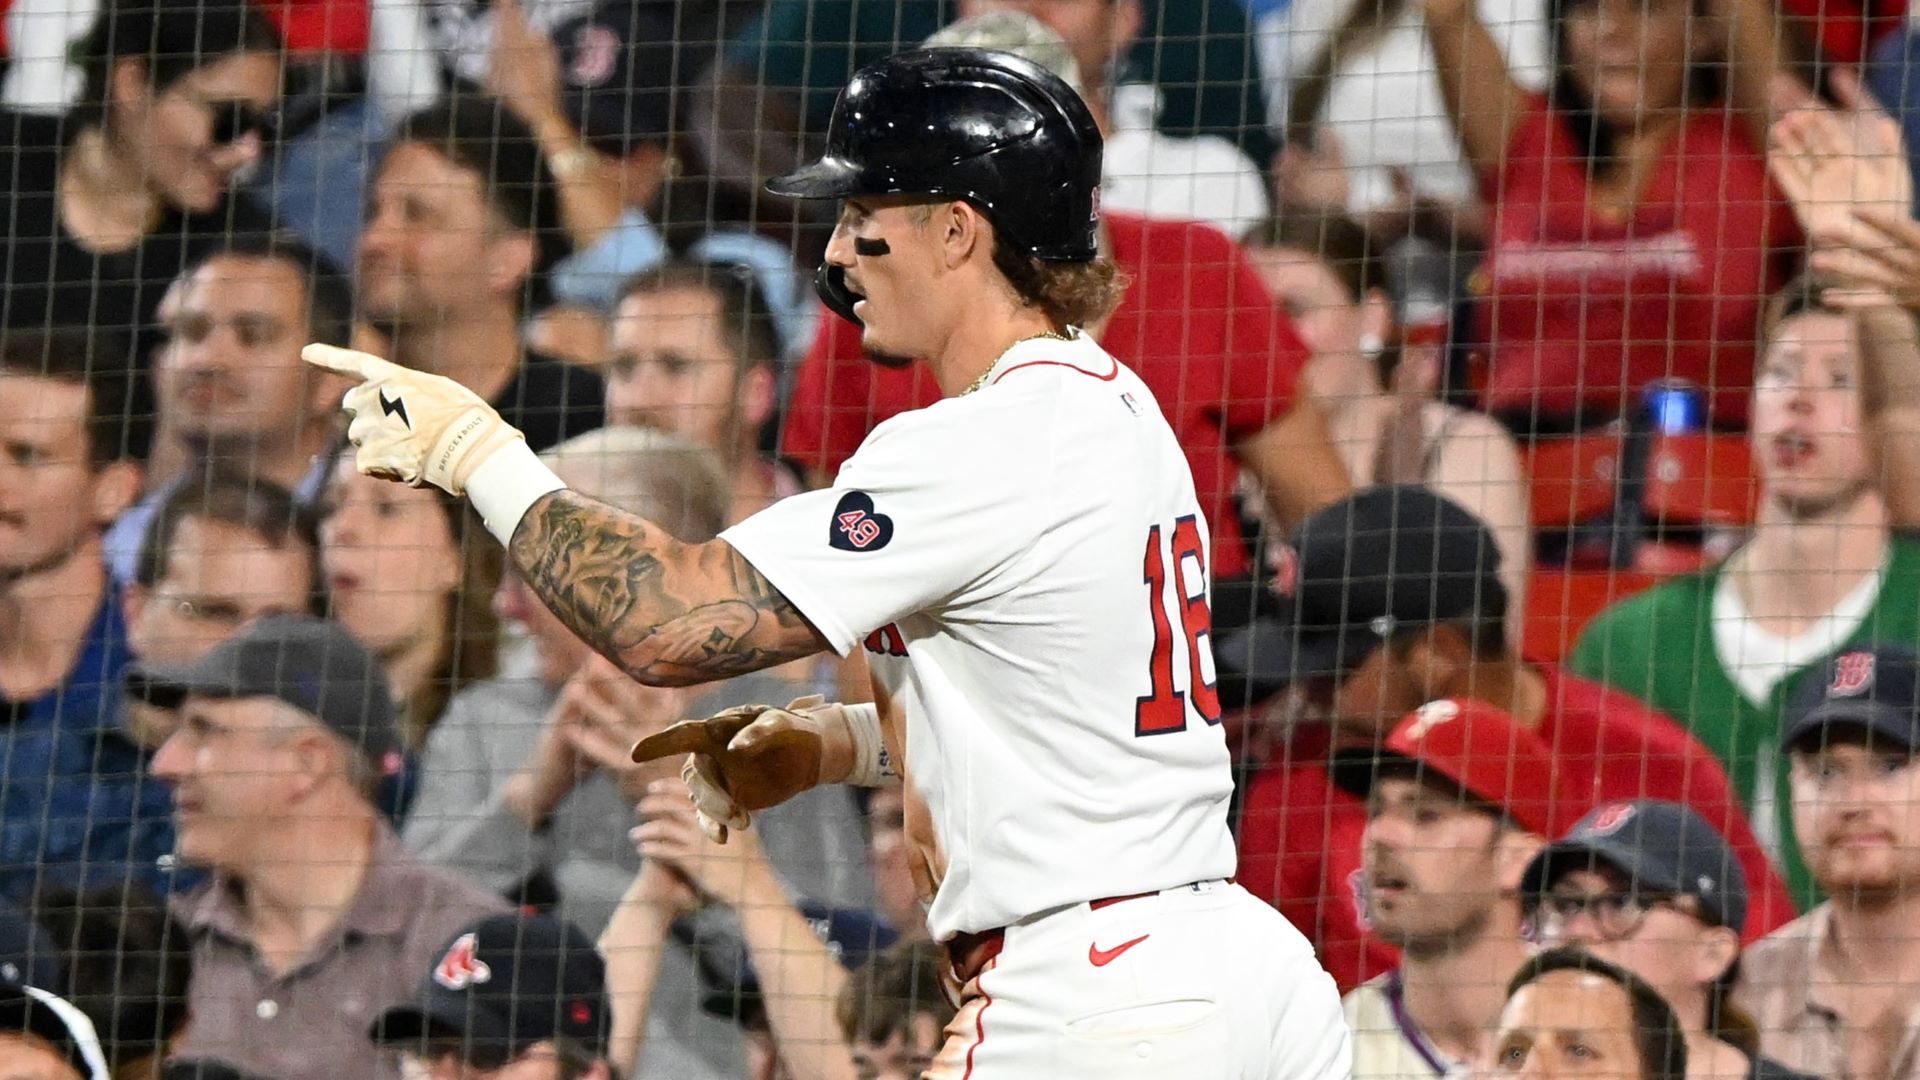 Ultimate Red Sox Show: Offense Explodes Vs. NL Contenders [Video]